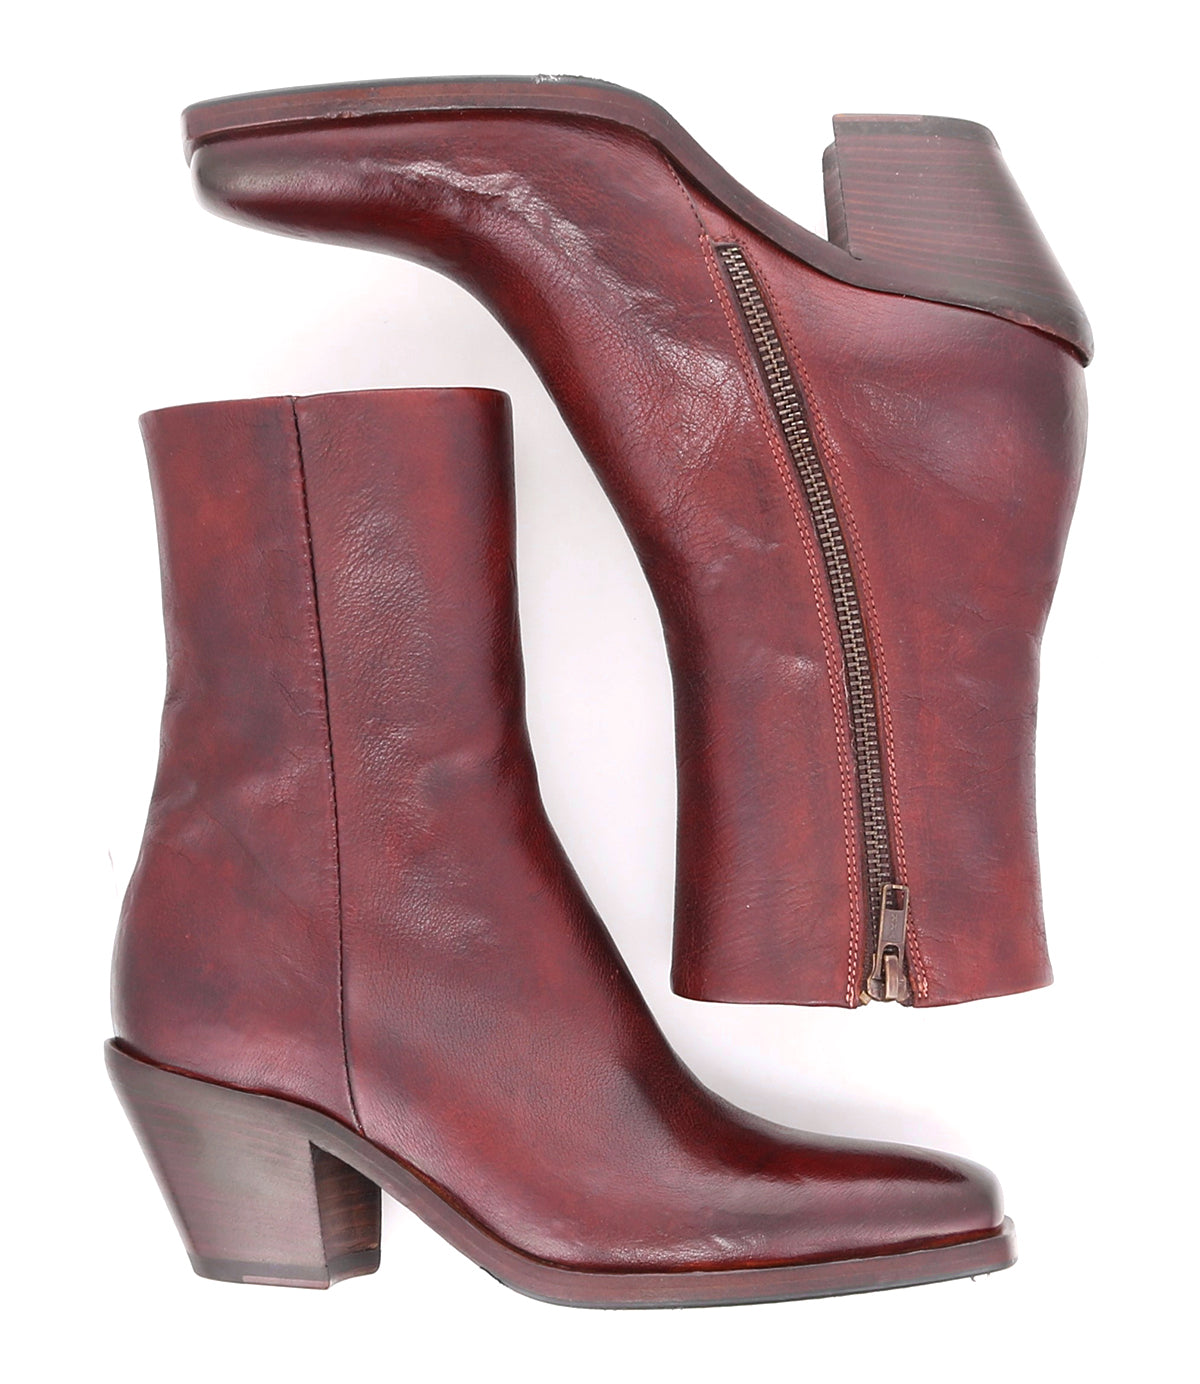 A pair of high-quality Bed Stu Vendue leather ankle boots with a sleek silhouette.